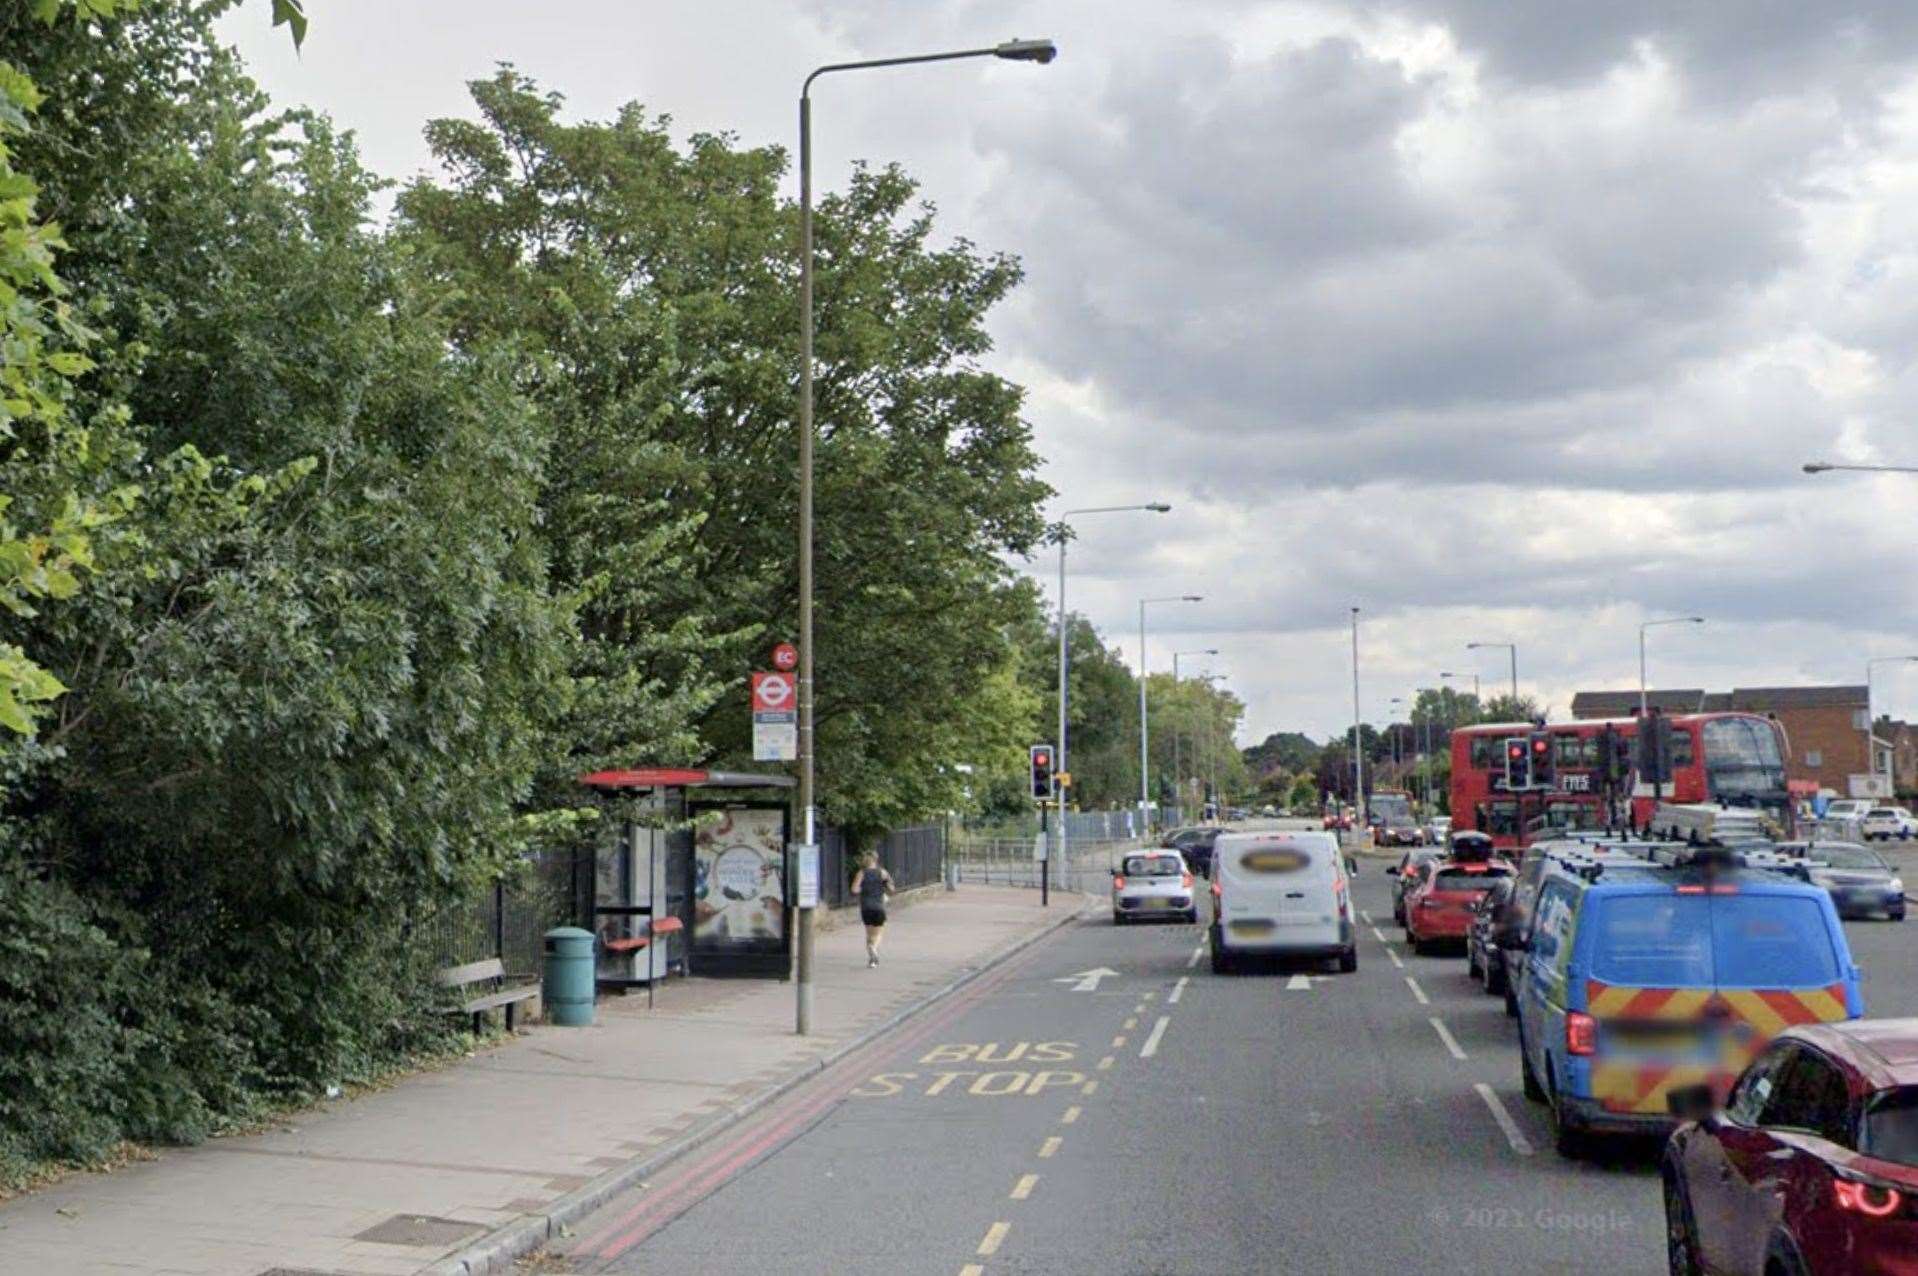 The deadly crash occurred at a bus stop on the A20 Eltham Road in Greenwich. Picture: Google Maps